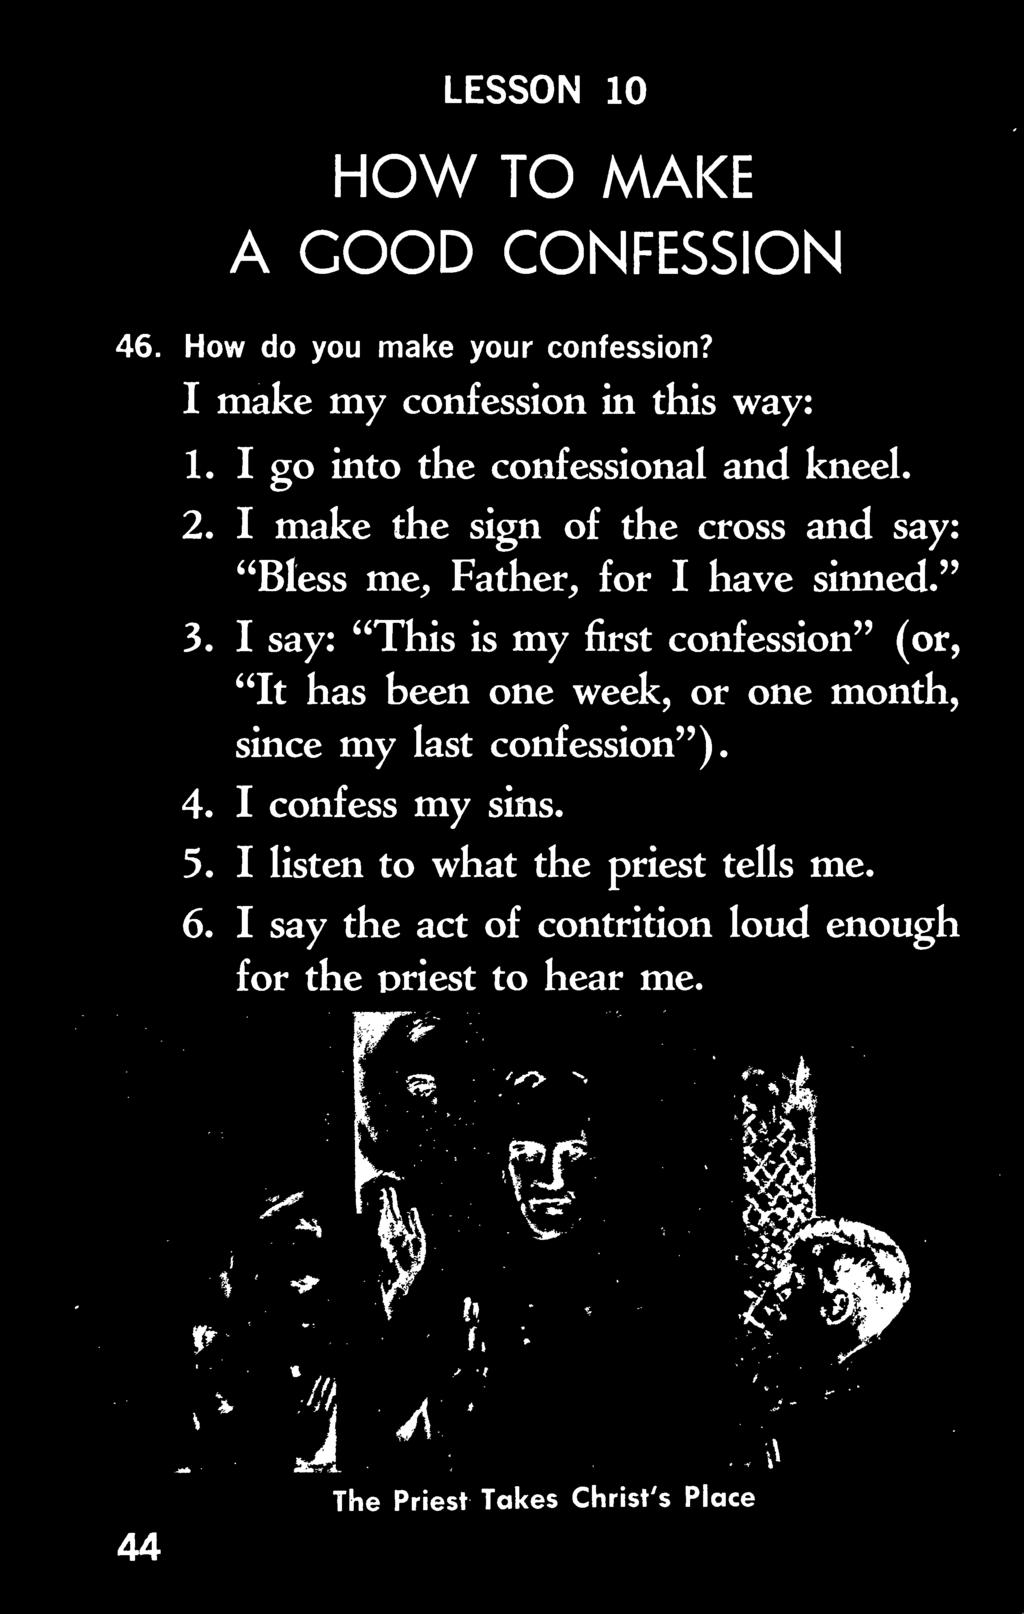 my last confession ). 4. I confess my sins. 5. I listen to what the priest tells me.